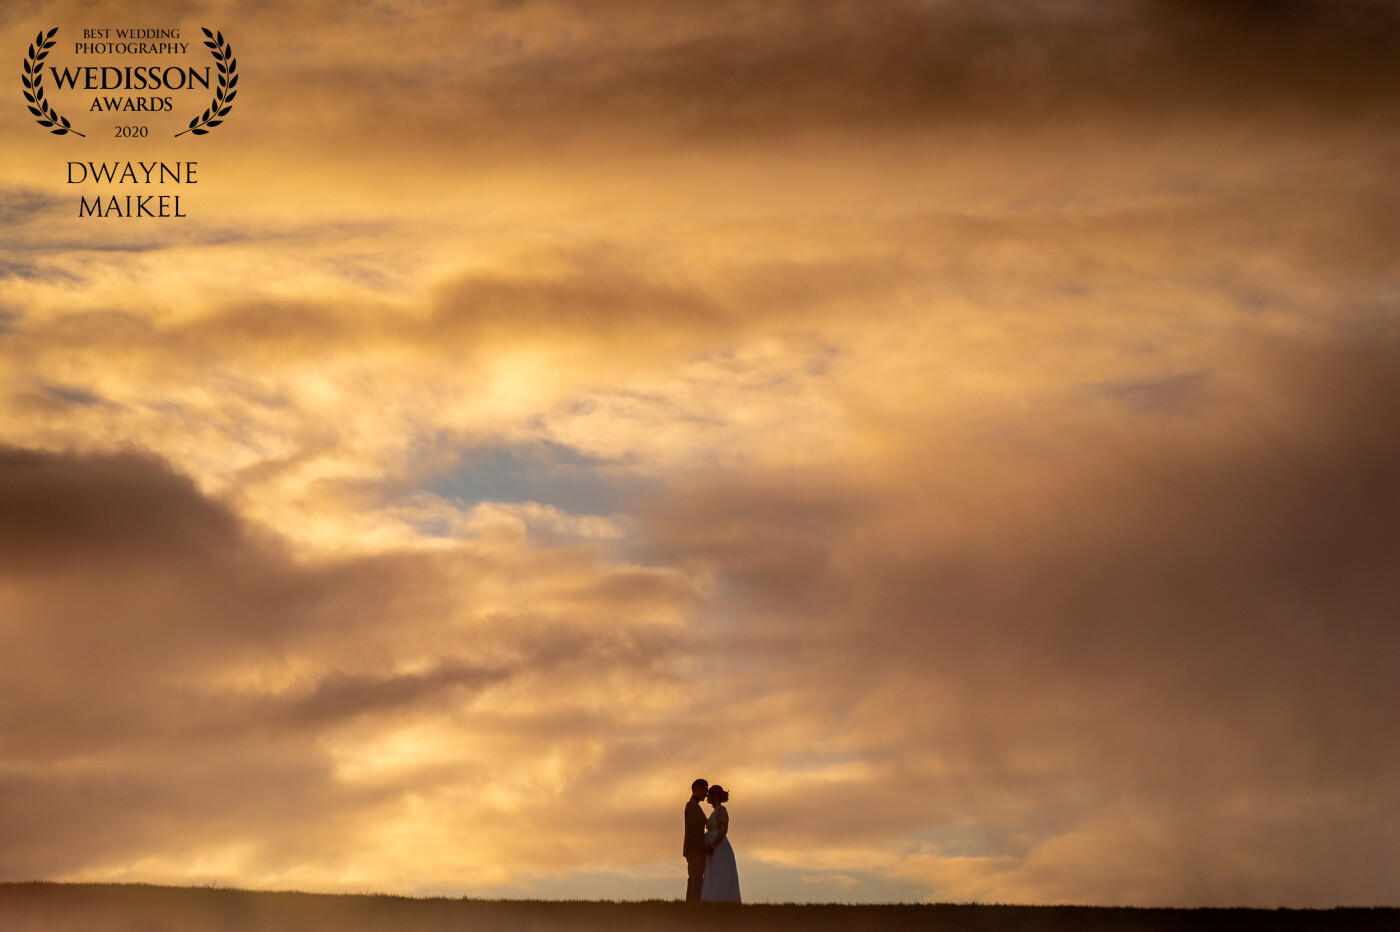 A lovely cold, winter wedding. Beautiful sunset sky. Thanks, Wedisson for picking this one out.   